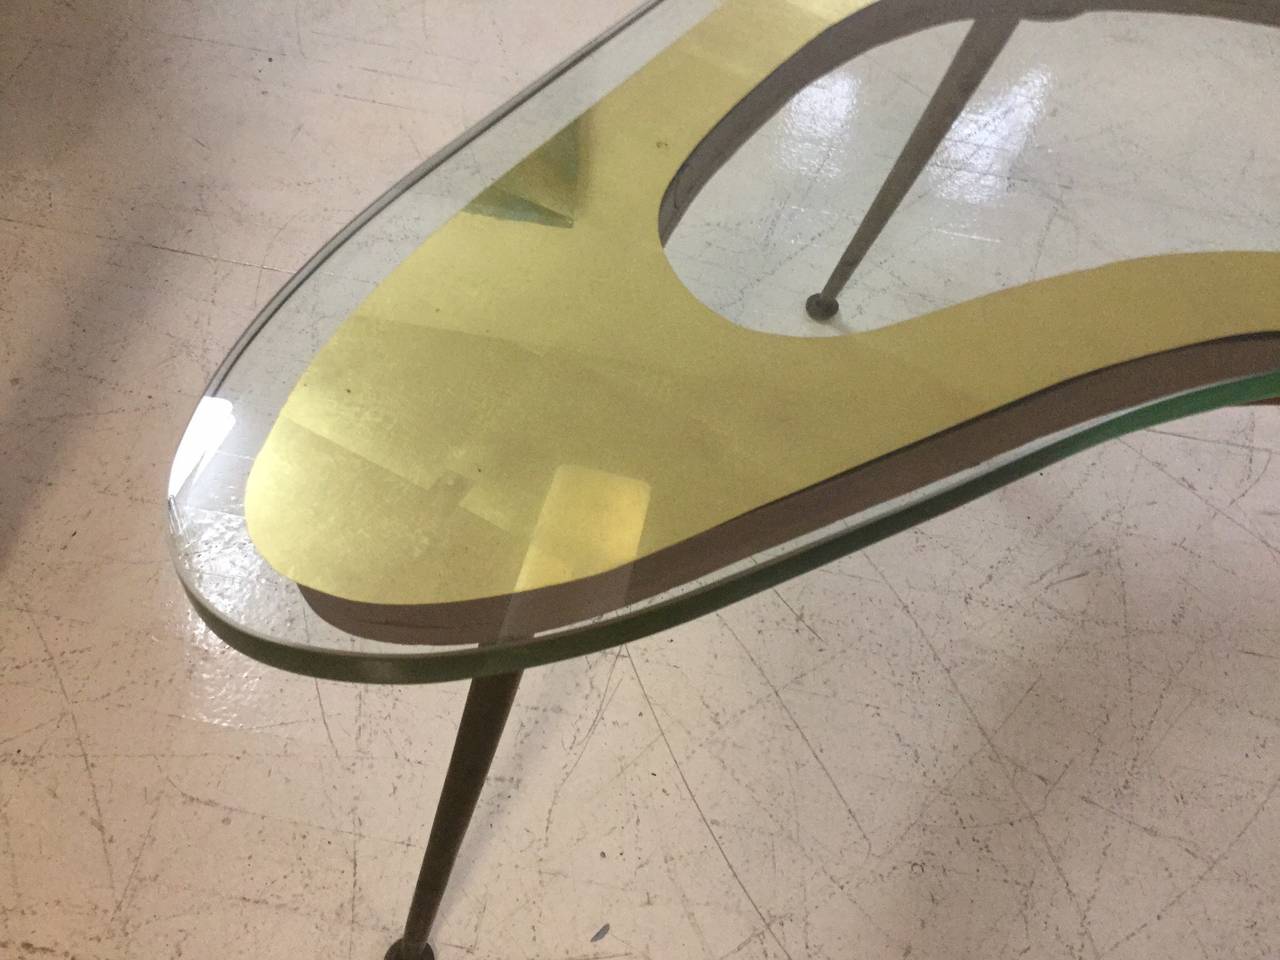 Super elegant Italian coffee table in a free-form style of Fontana Arte.
Featuring a boomerang shaped thick glass top with a reversed gold.
Leaf edge supported by a slender tapered brass legs with sabots.